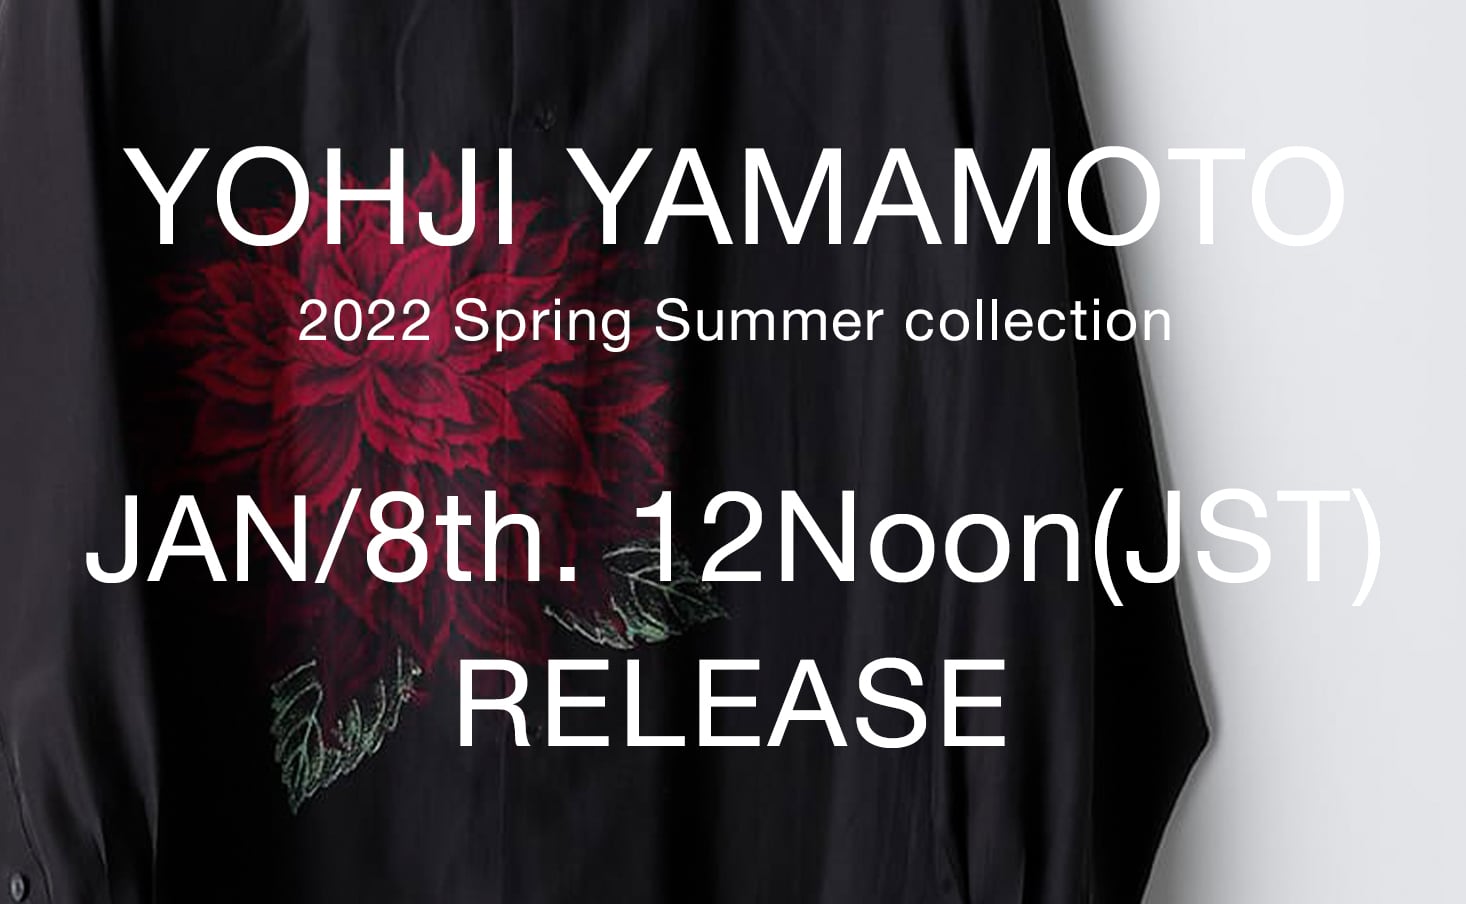 Yohji Yamamoto 22SS collection to go on sale from 12 noon on